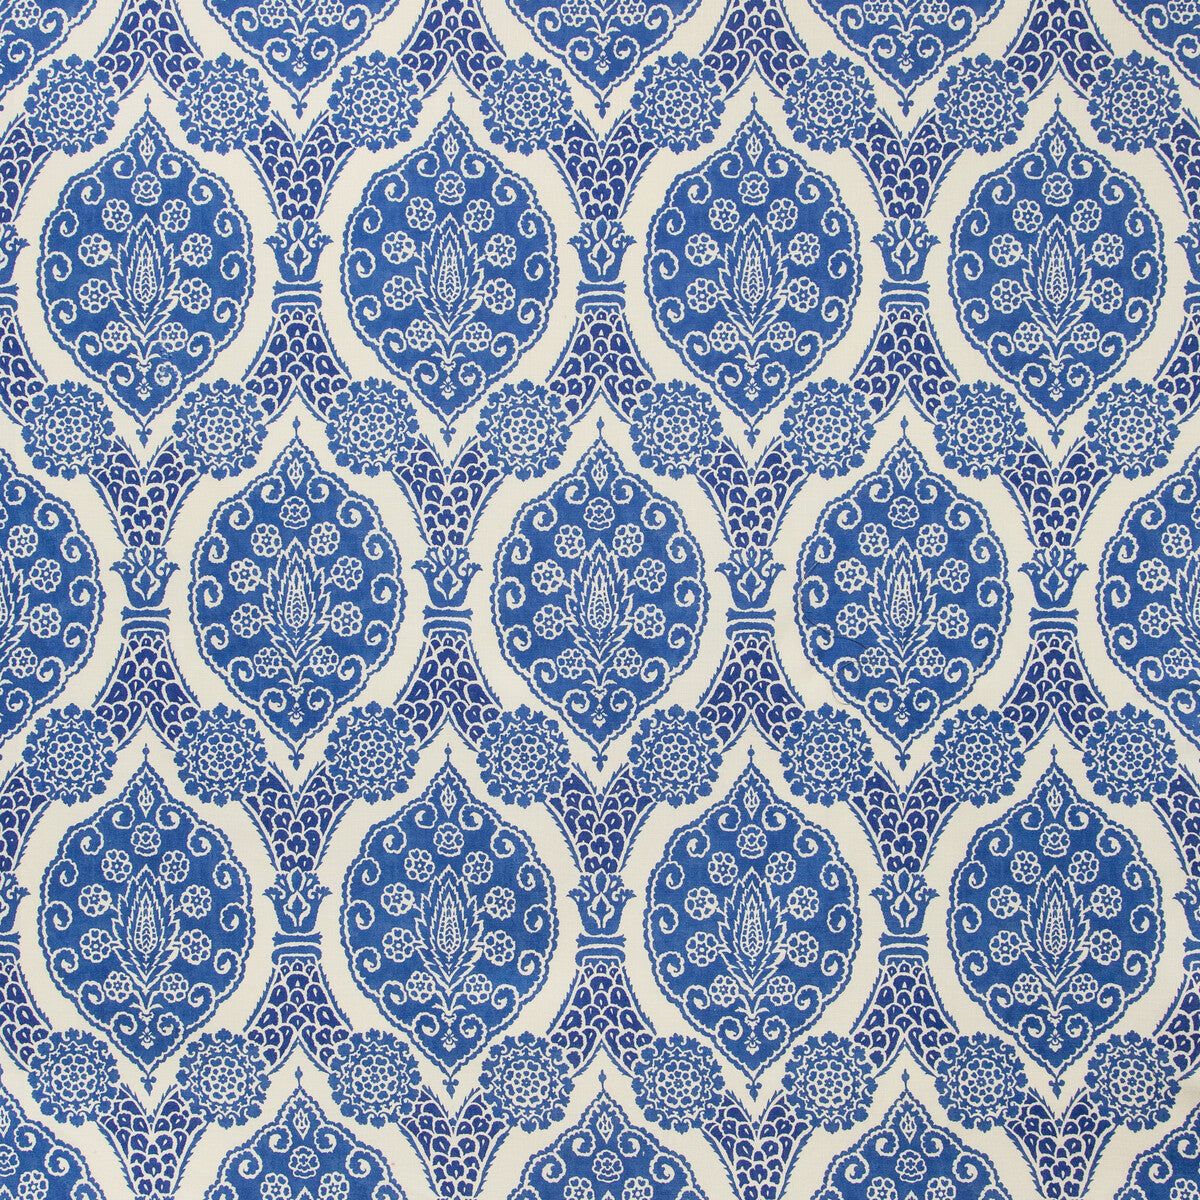 Sufera Print fabric in blue color - pattern 8020103.55.0 - by Brunschwig &amp; Fils in the Grand Bazaar collection